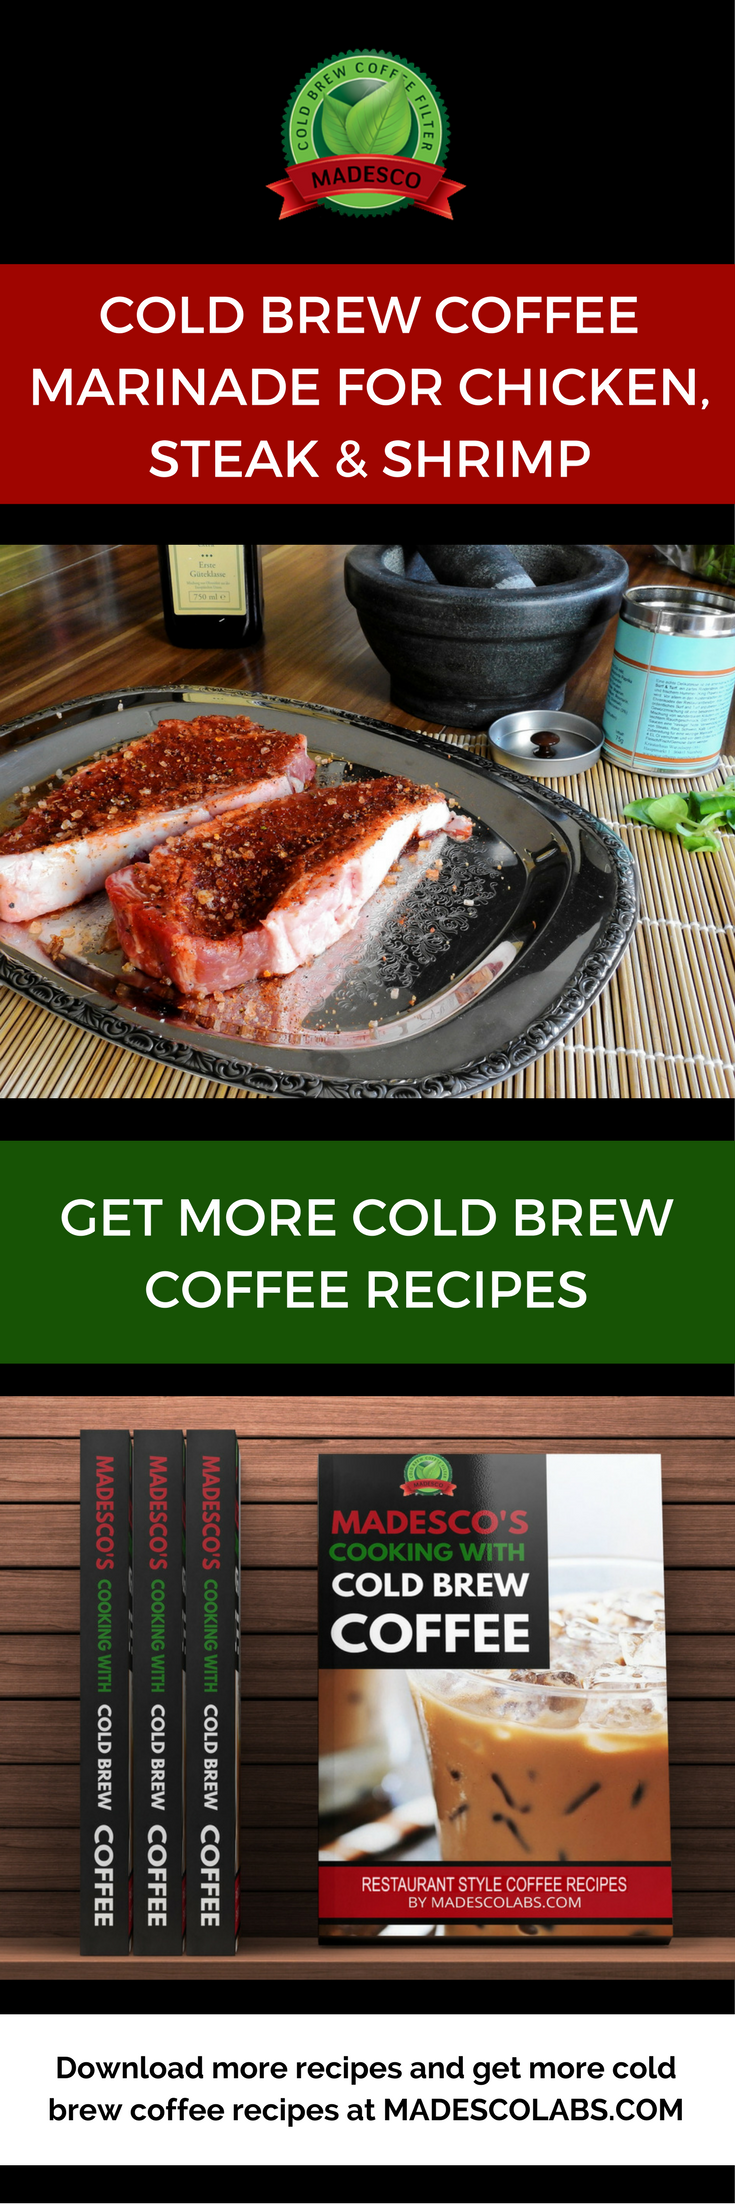 COLD BREW COFFEE MARINADE FOR CHICKEN, STEAK AND SHRIMP AT MADESCOLABS.COM